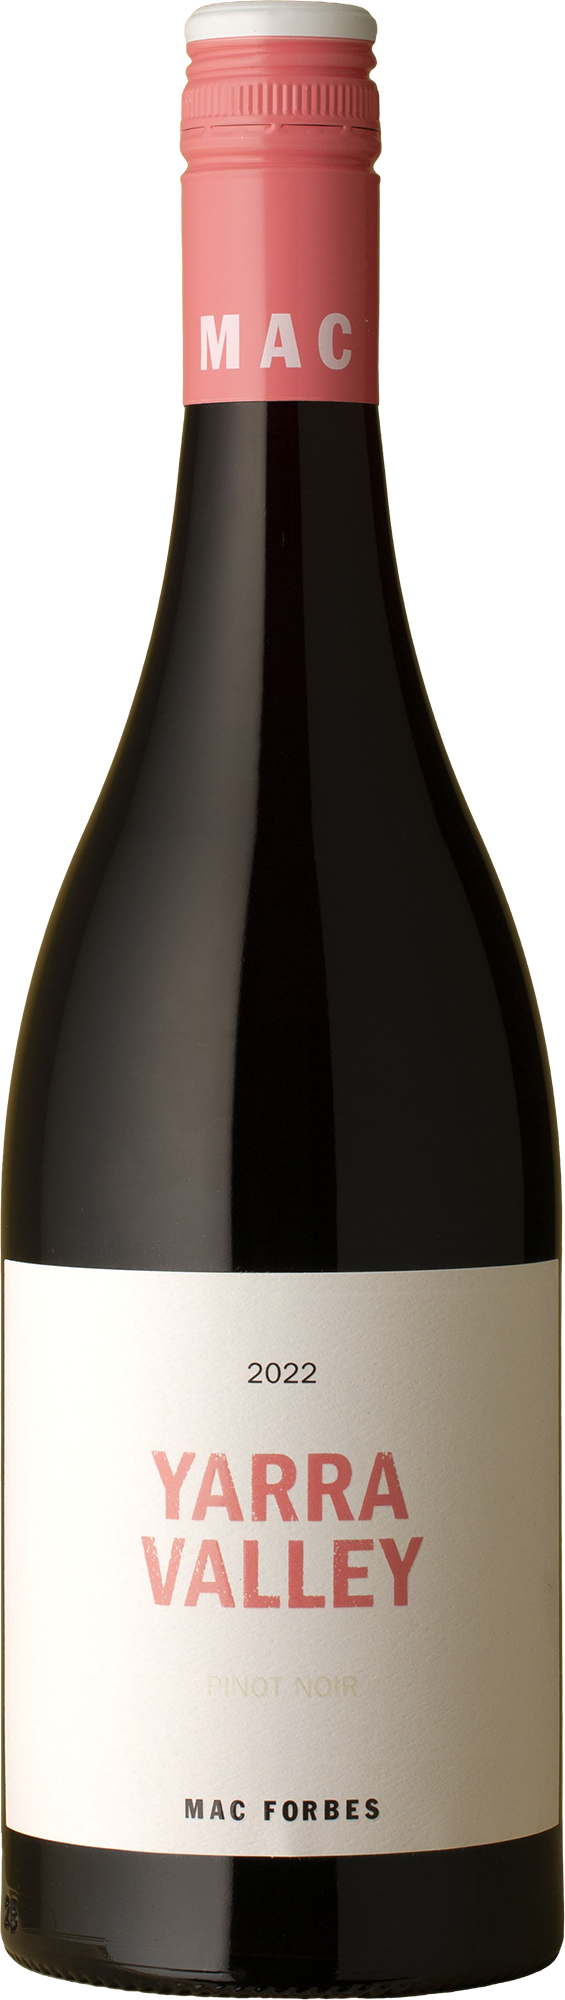 Mac Forbes - Yarra Valley Pinot Noir 2022 Red Wine